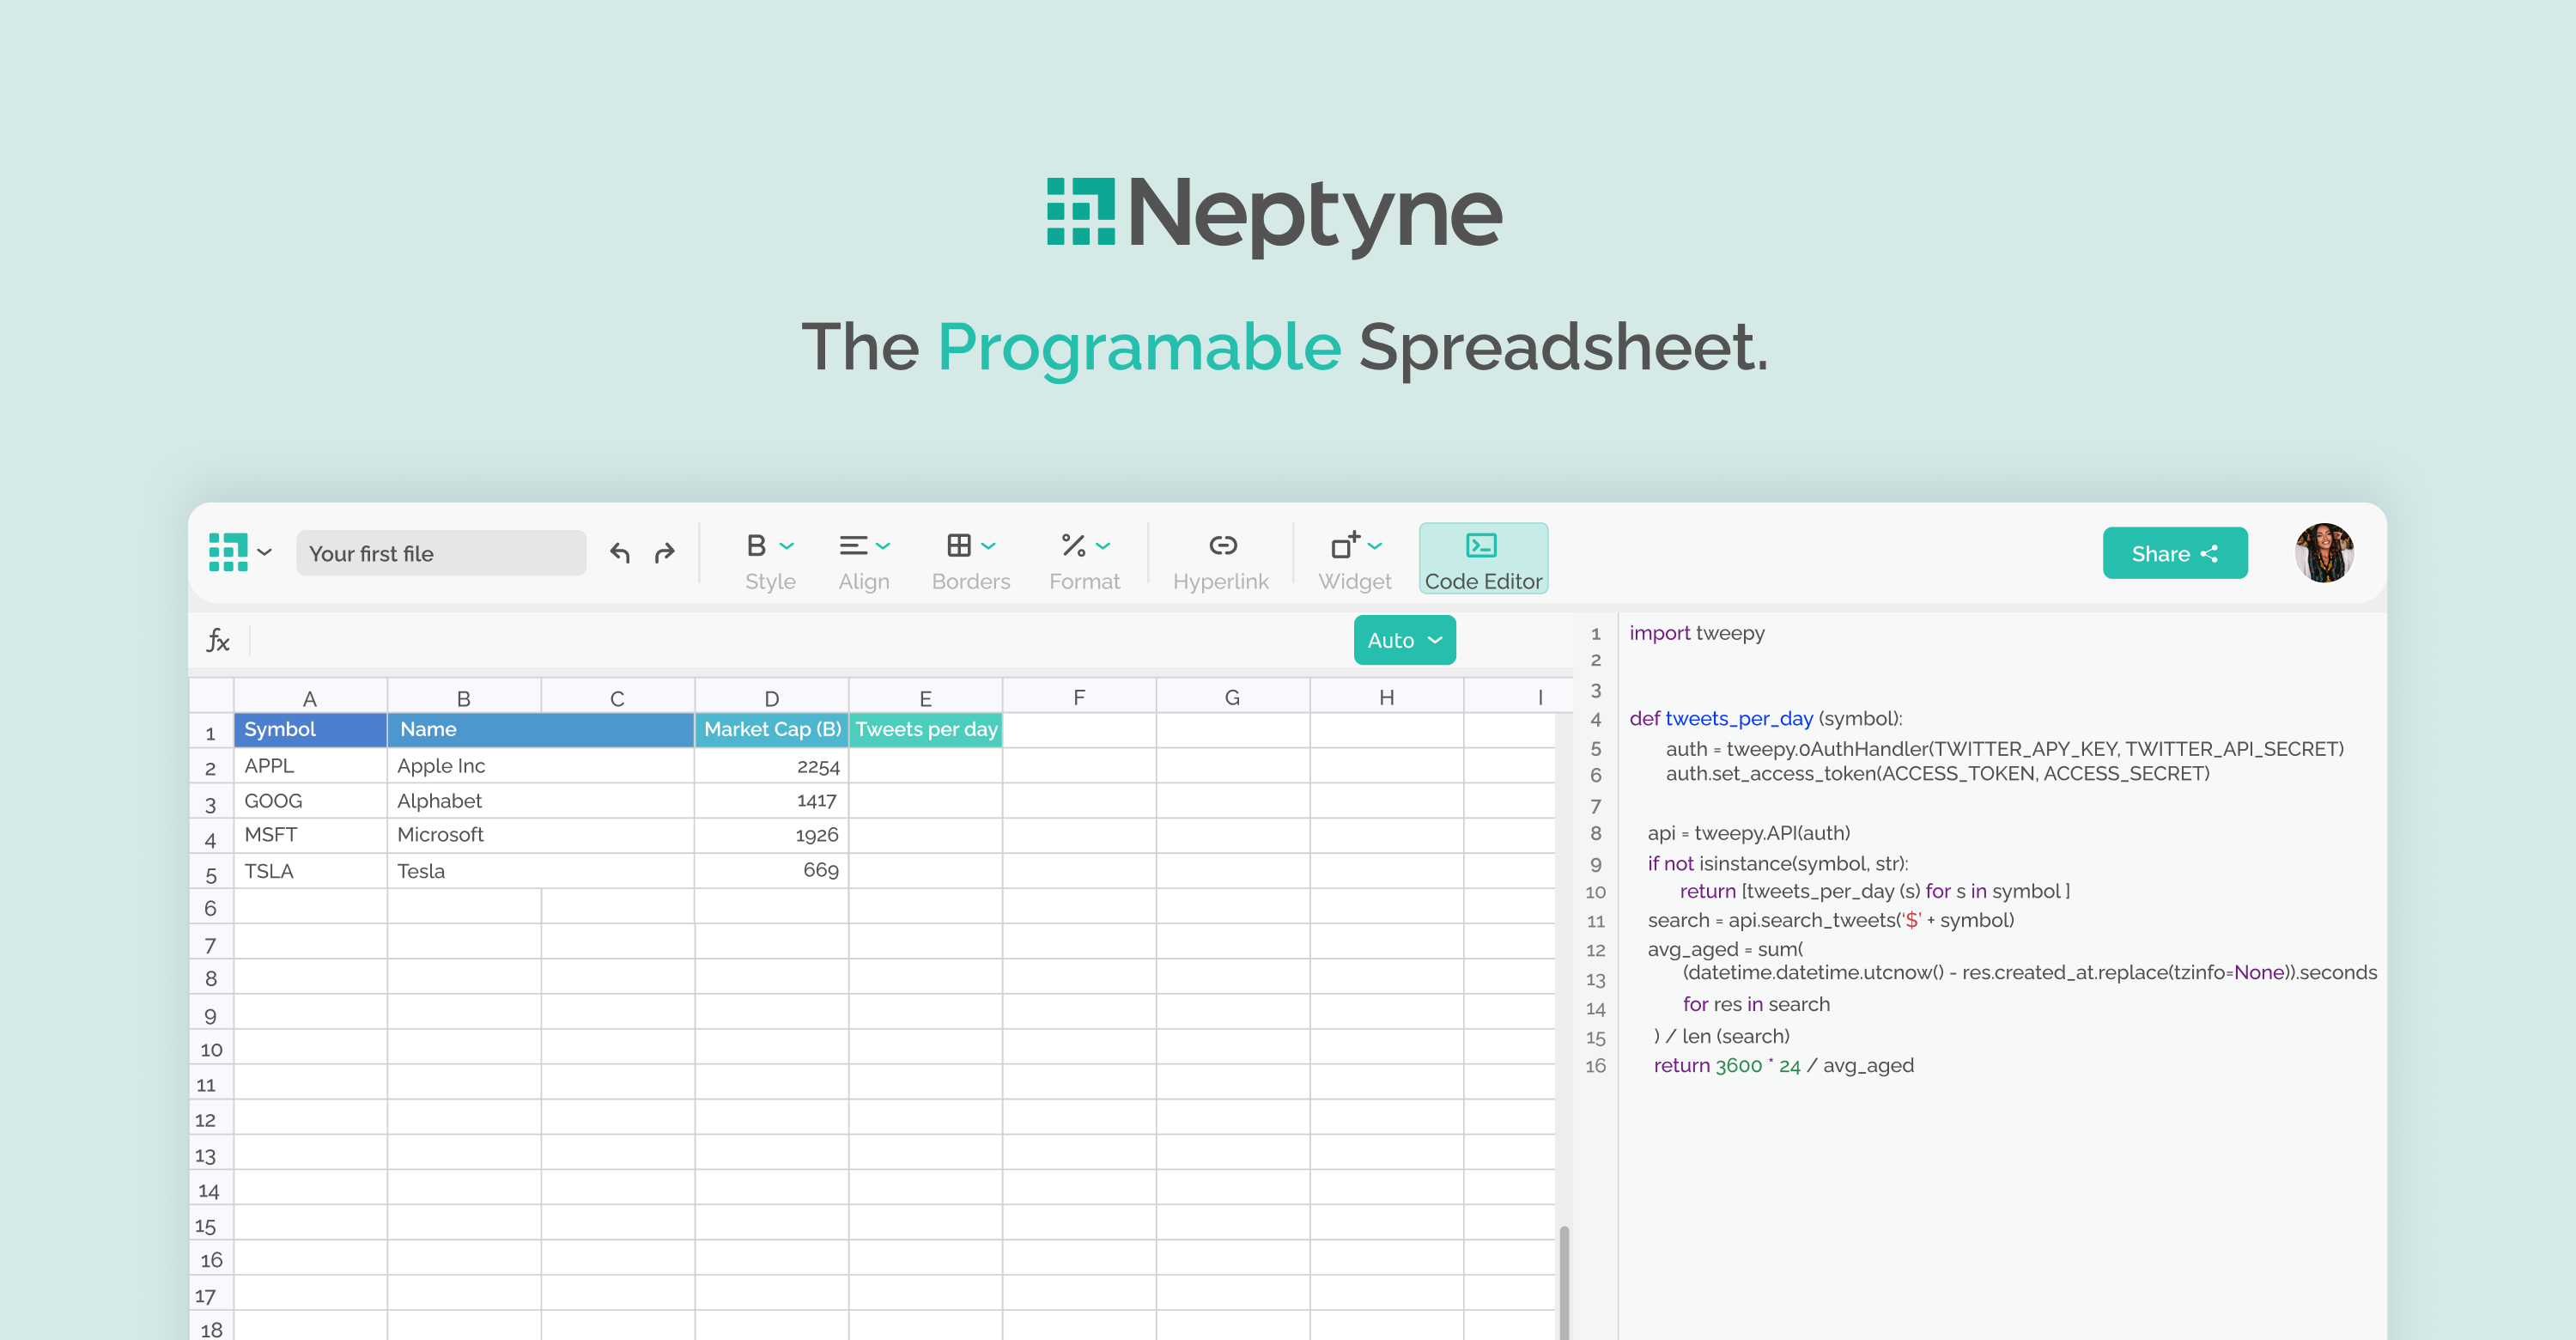 Neptyne is building a Python-powered spreadsheet for data scientists